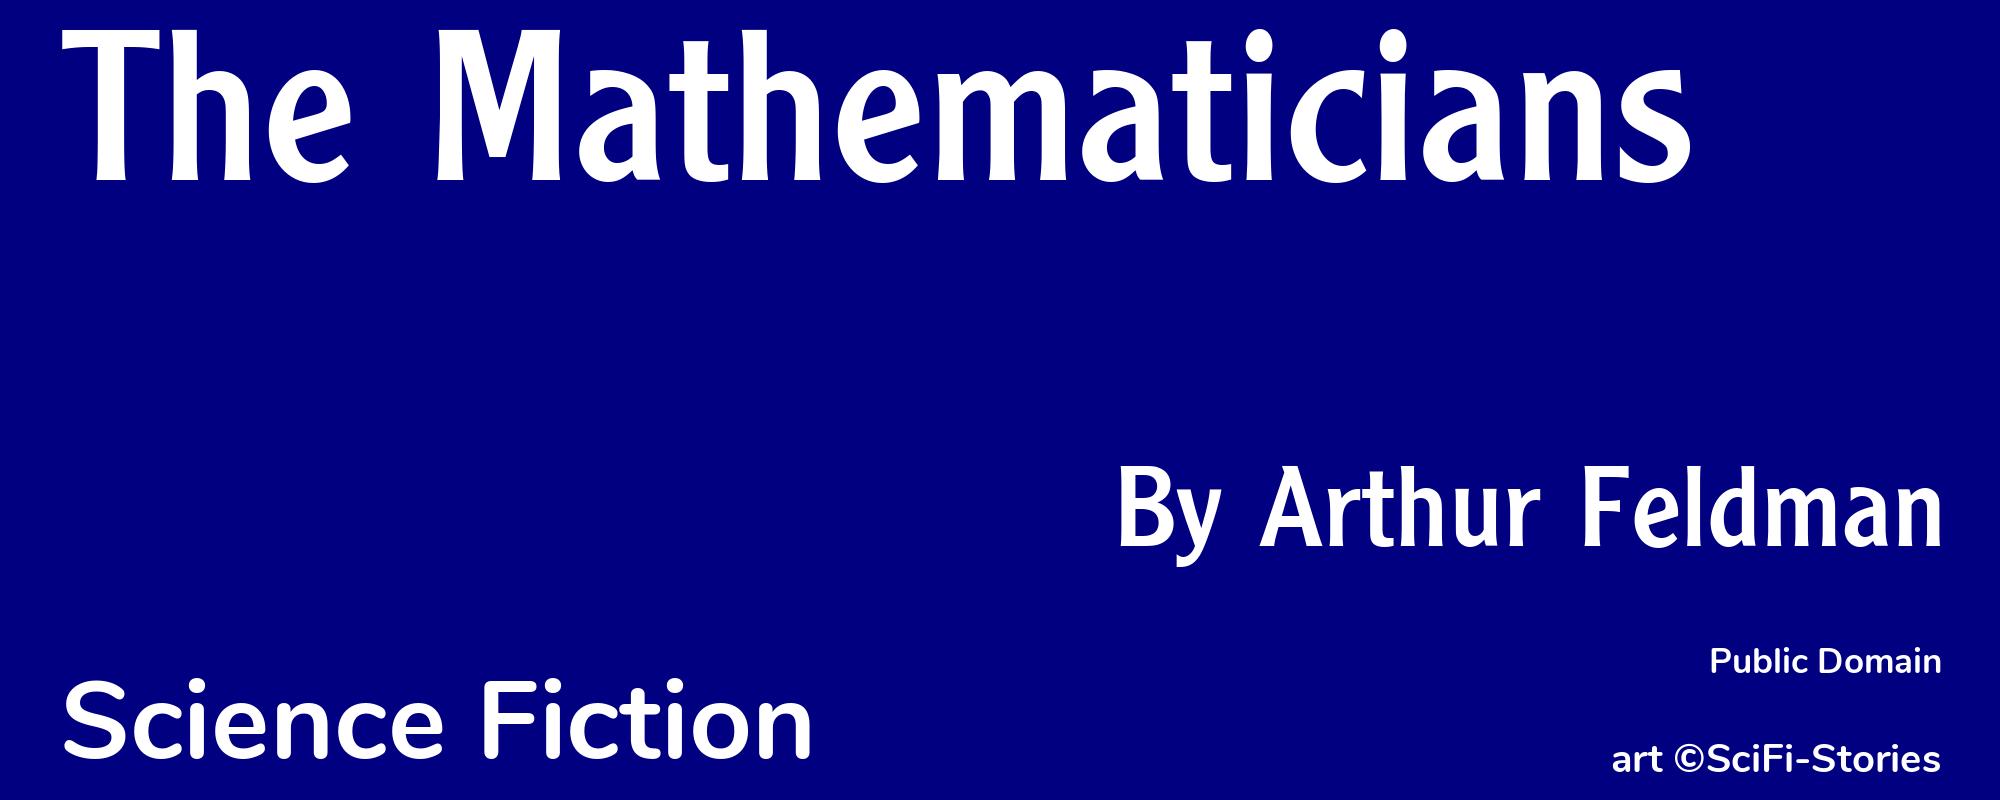 The Mathematicians - Cover